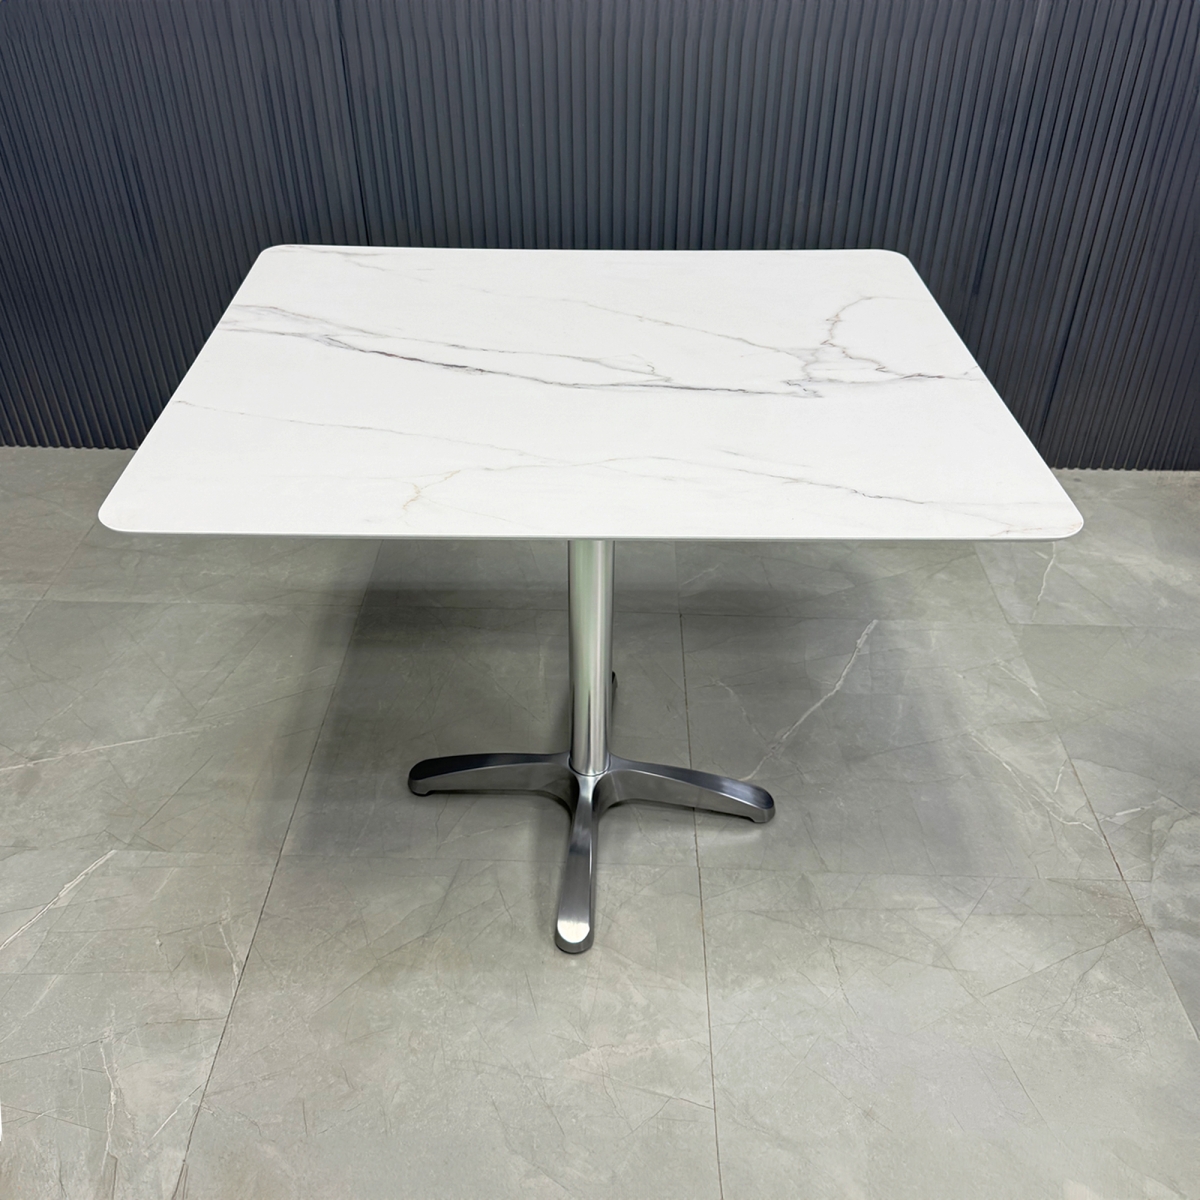 California Rectangular Conference/Cafeteria Table with Solenne Marble Engineered Stone Top - 34 In. - Stock #71